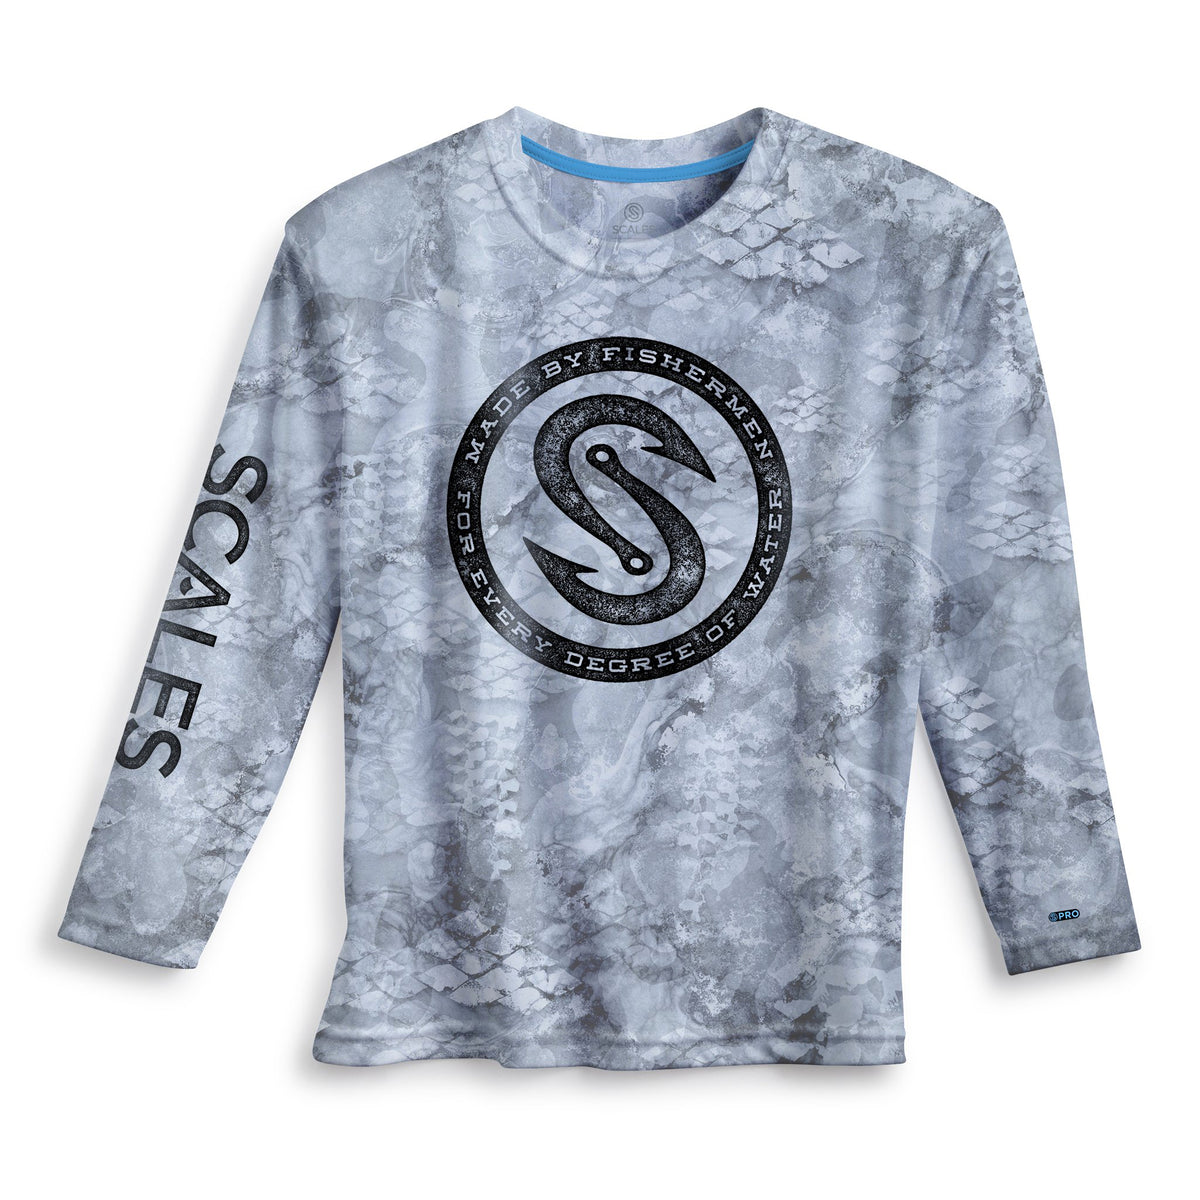 SCALES Every Degree Camo Youth PRO Long Sleeve Performance